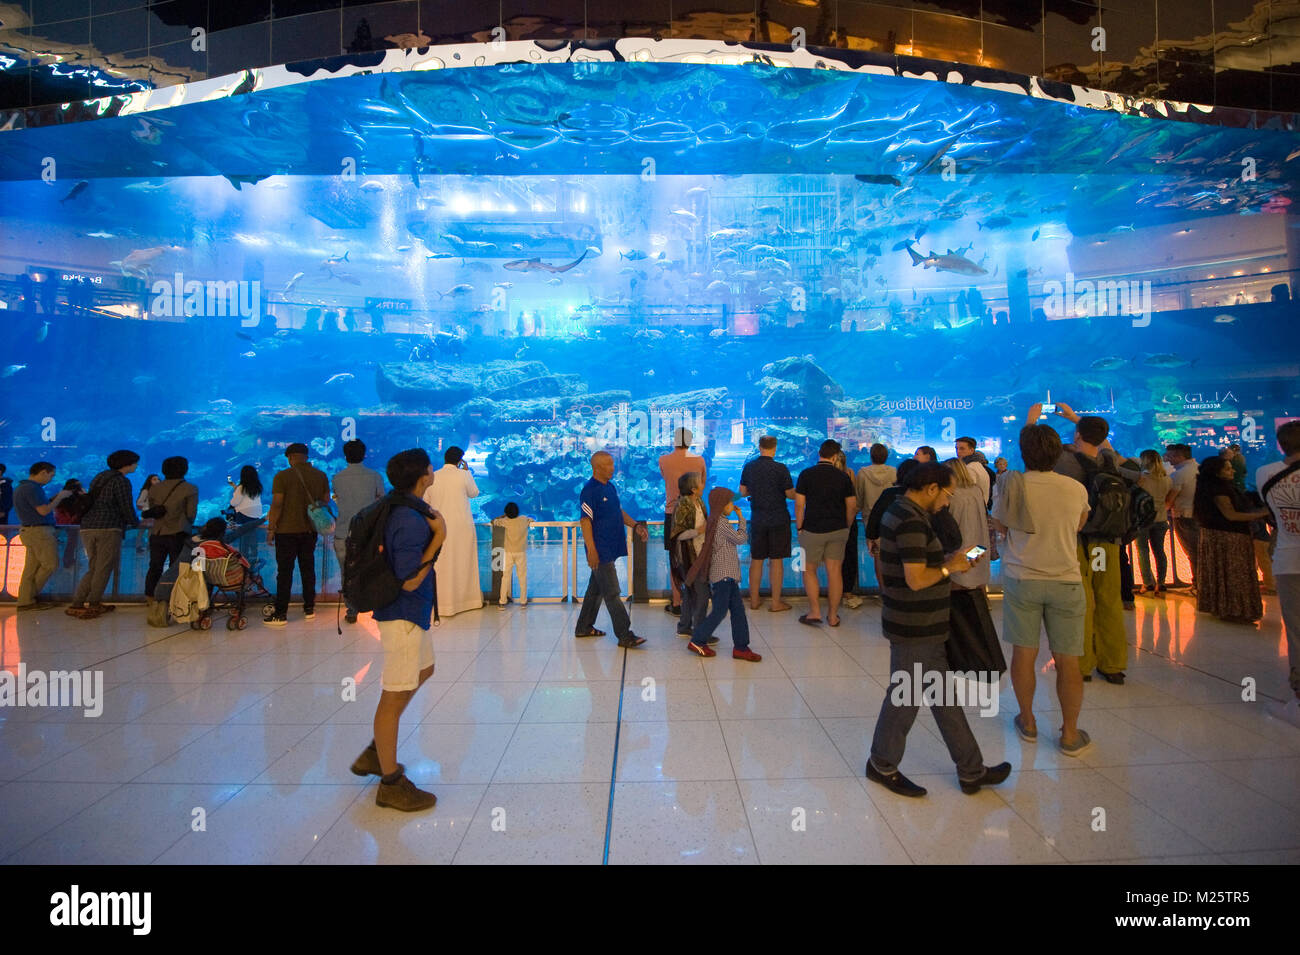 DUBAI, UNITED ARAB EMIRATES - JAN 02, 2018: Tourists are watching at a big aquarium inside the shopping mall in the center of the city near the Burj K Stock Photo